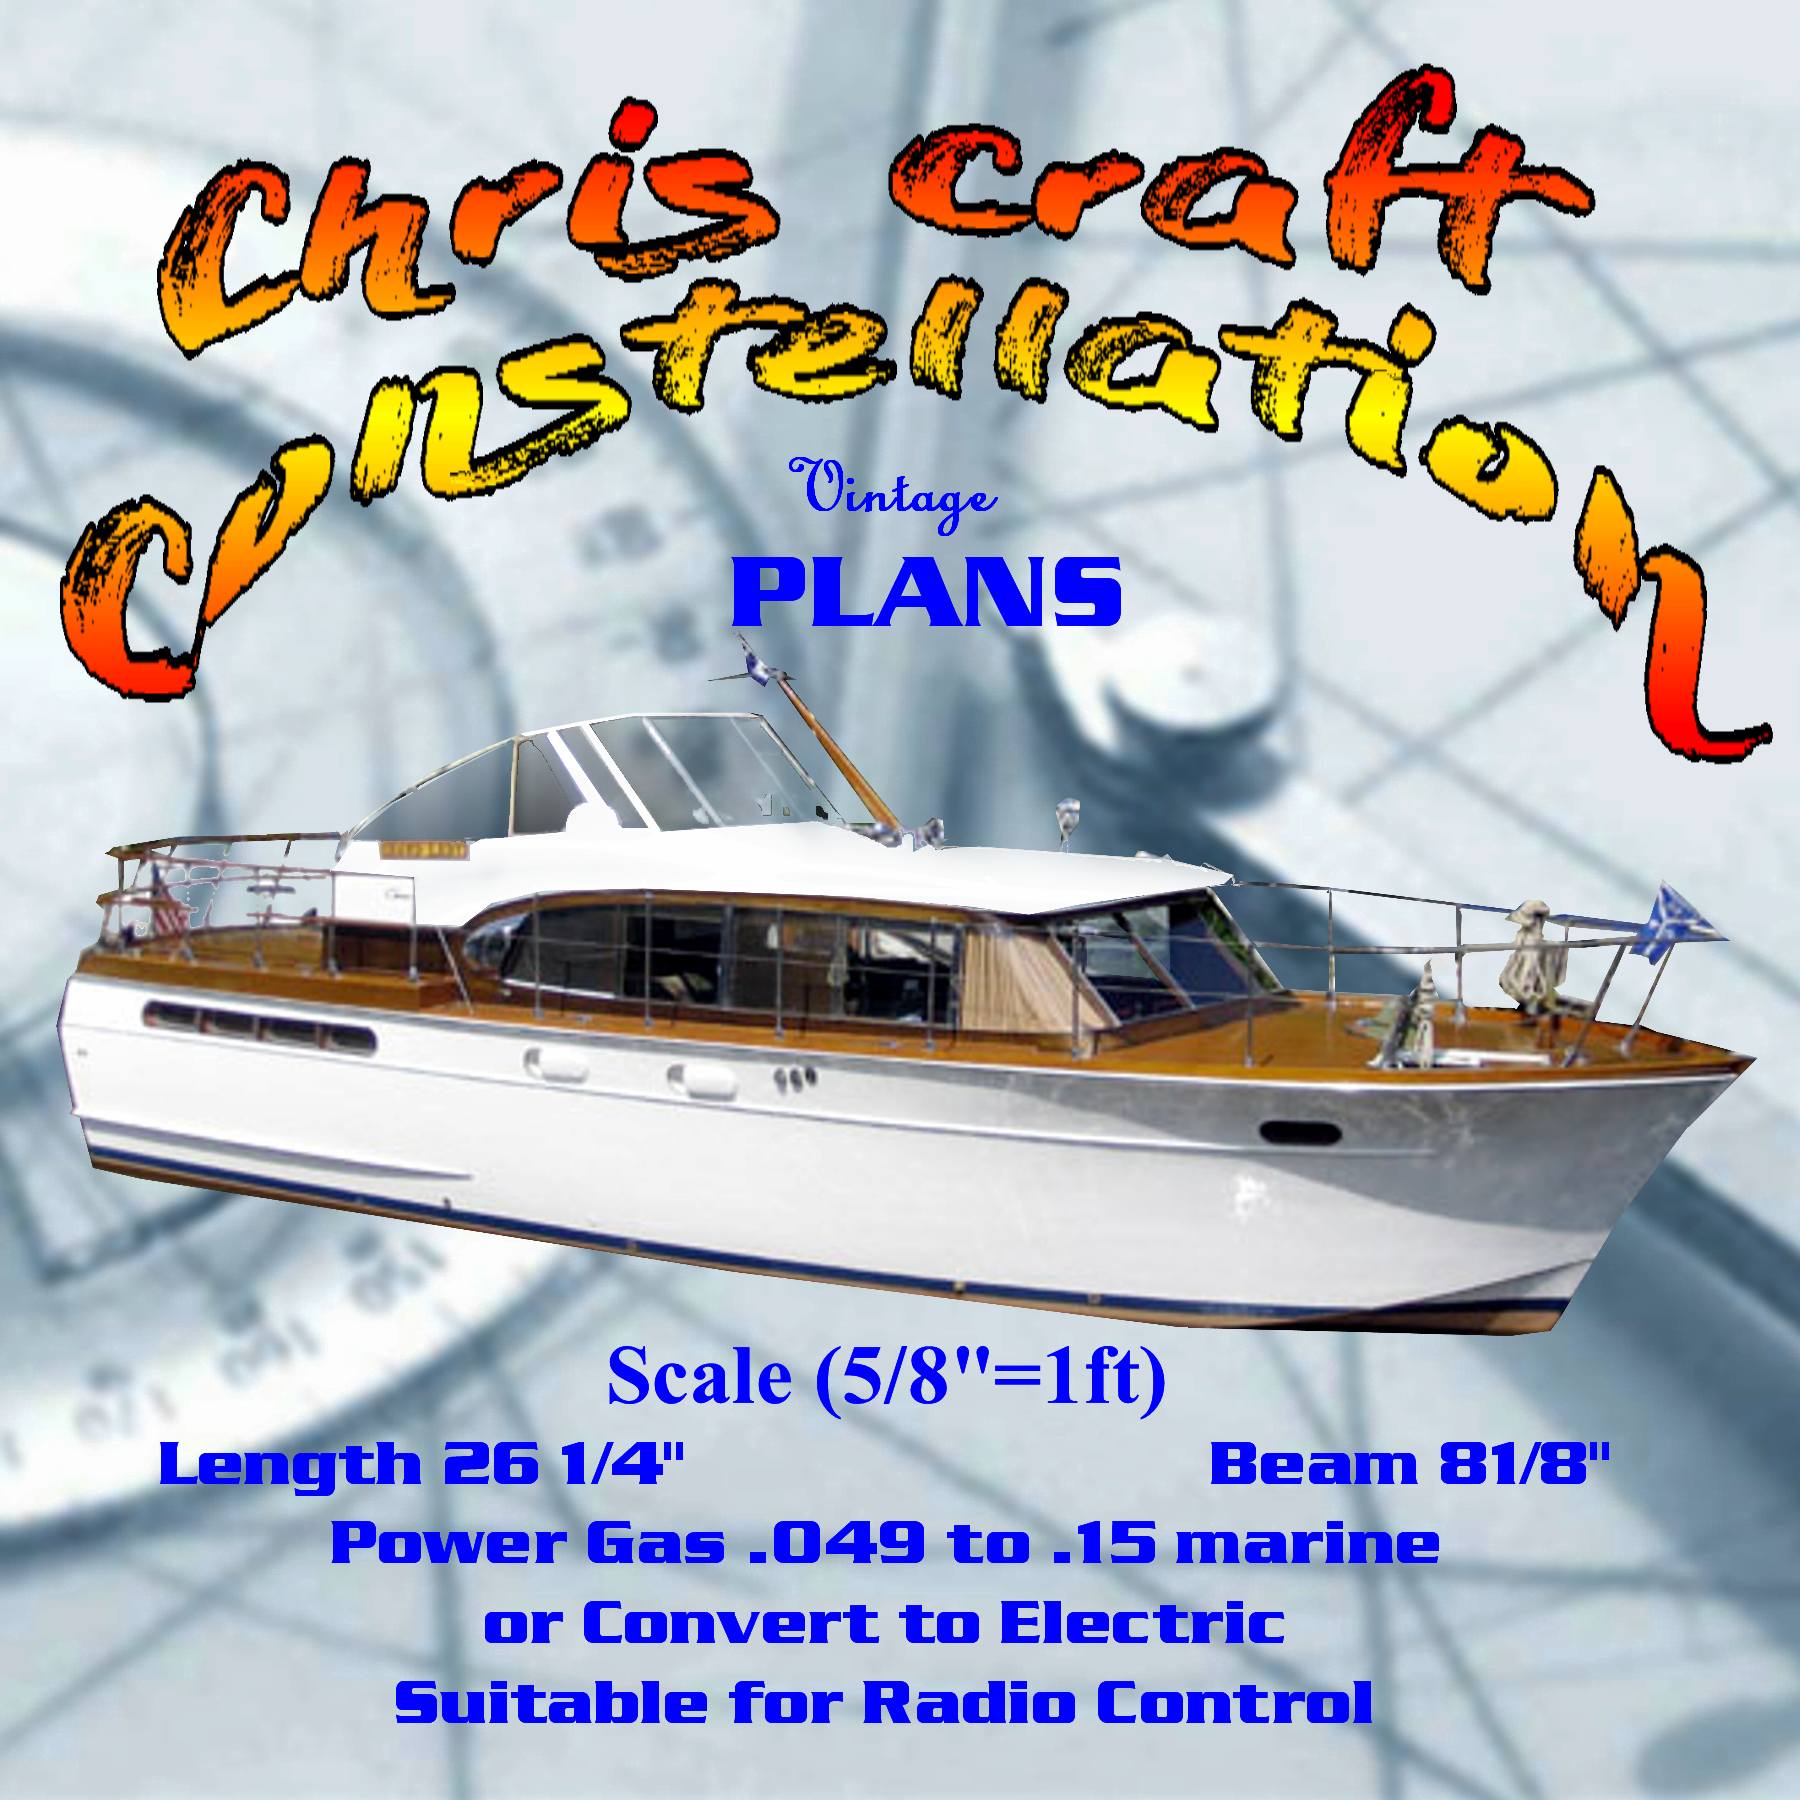 full size printed plans and notes to build a scale (5/8"=1ft) chris craft constellation full size printed plans and notes